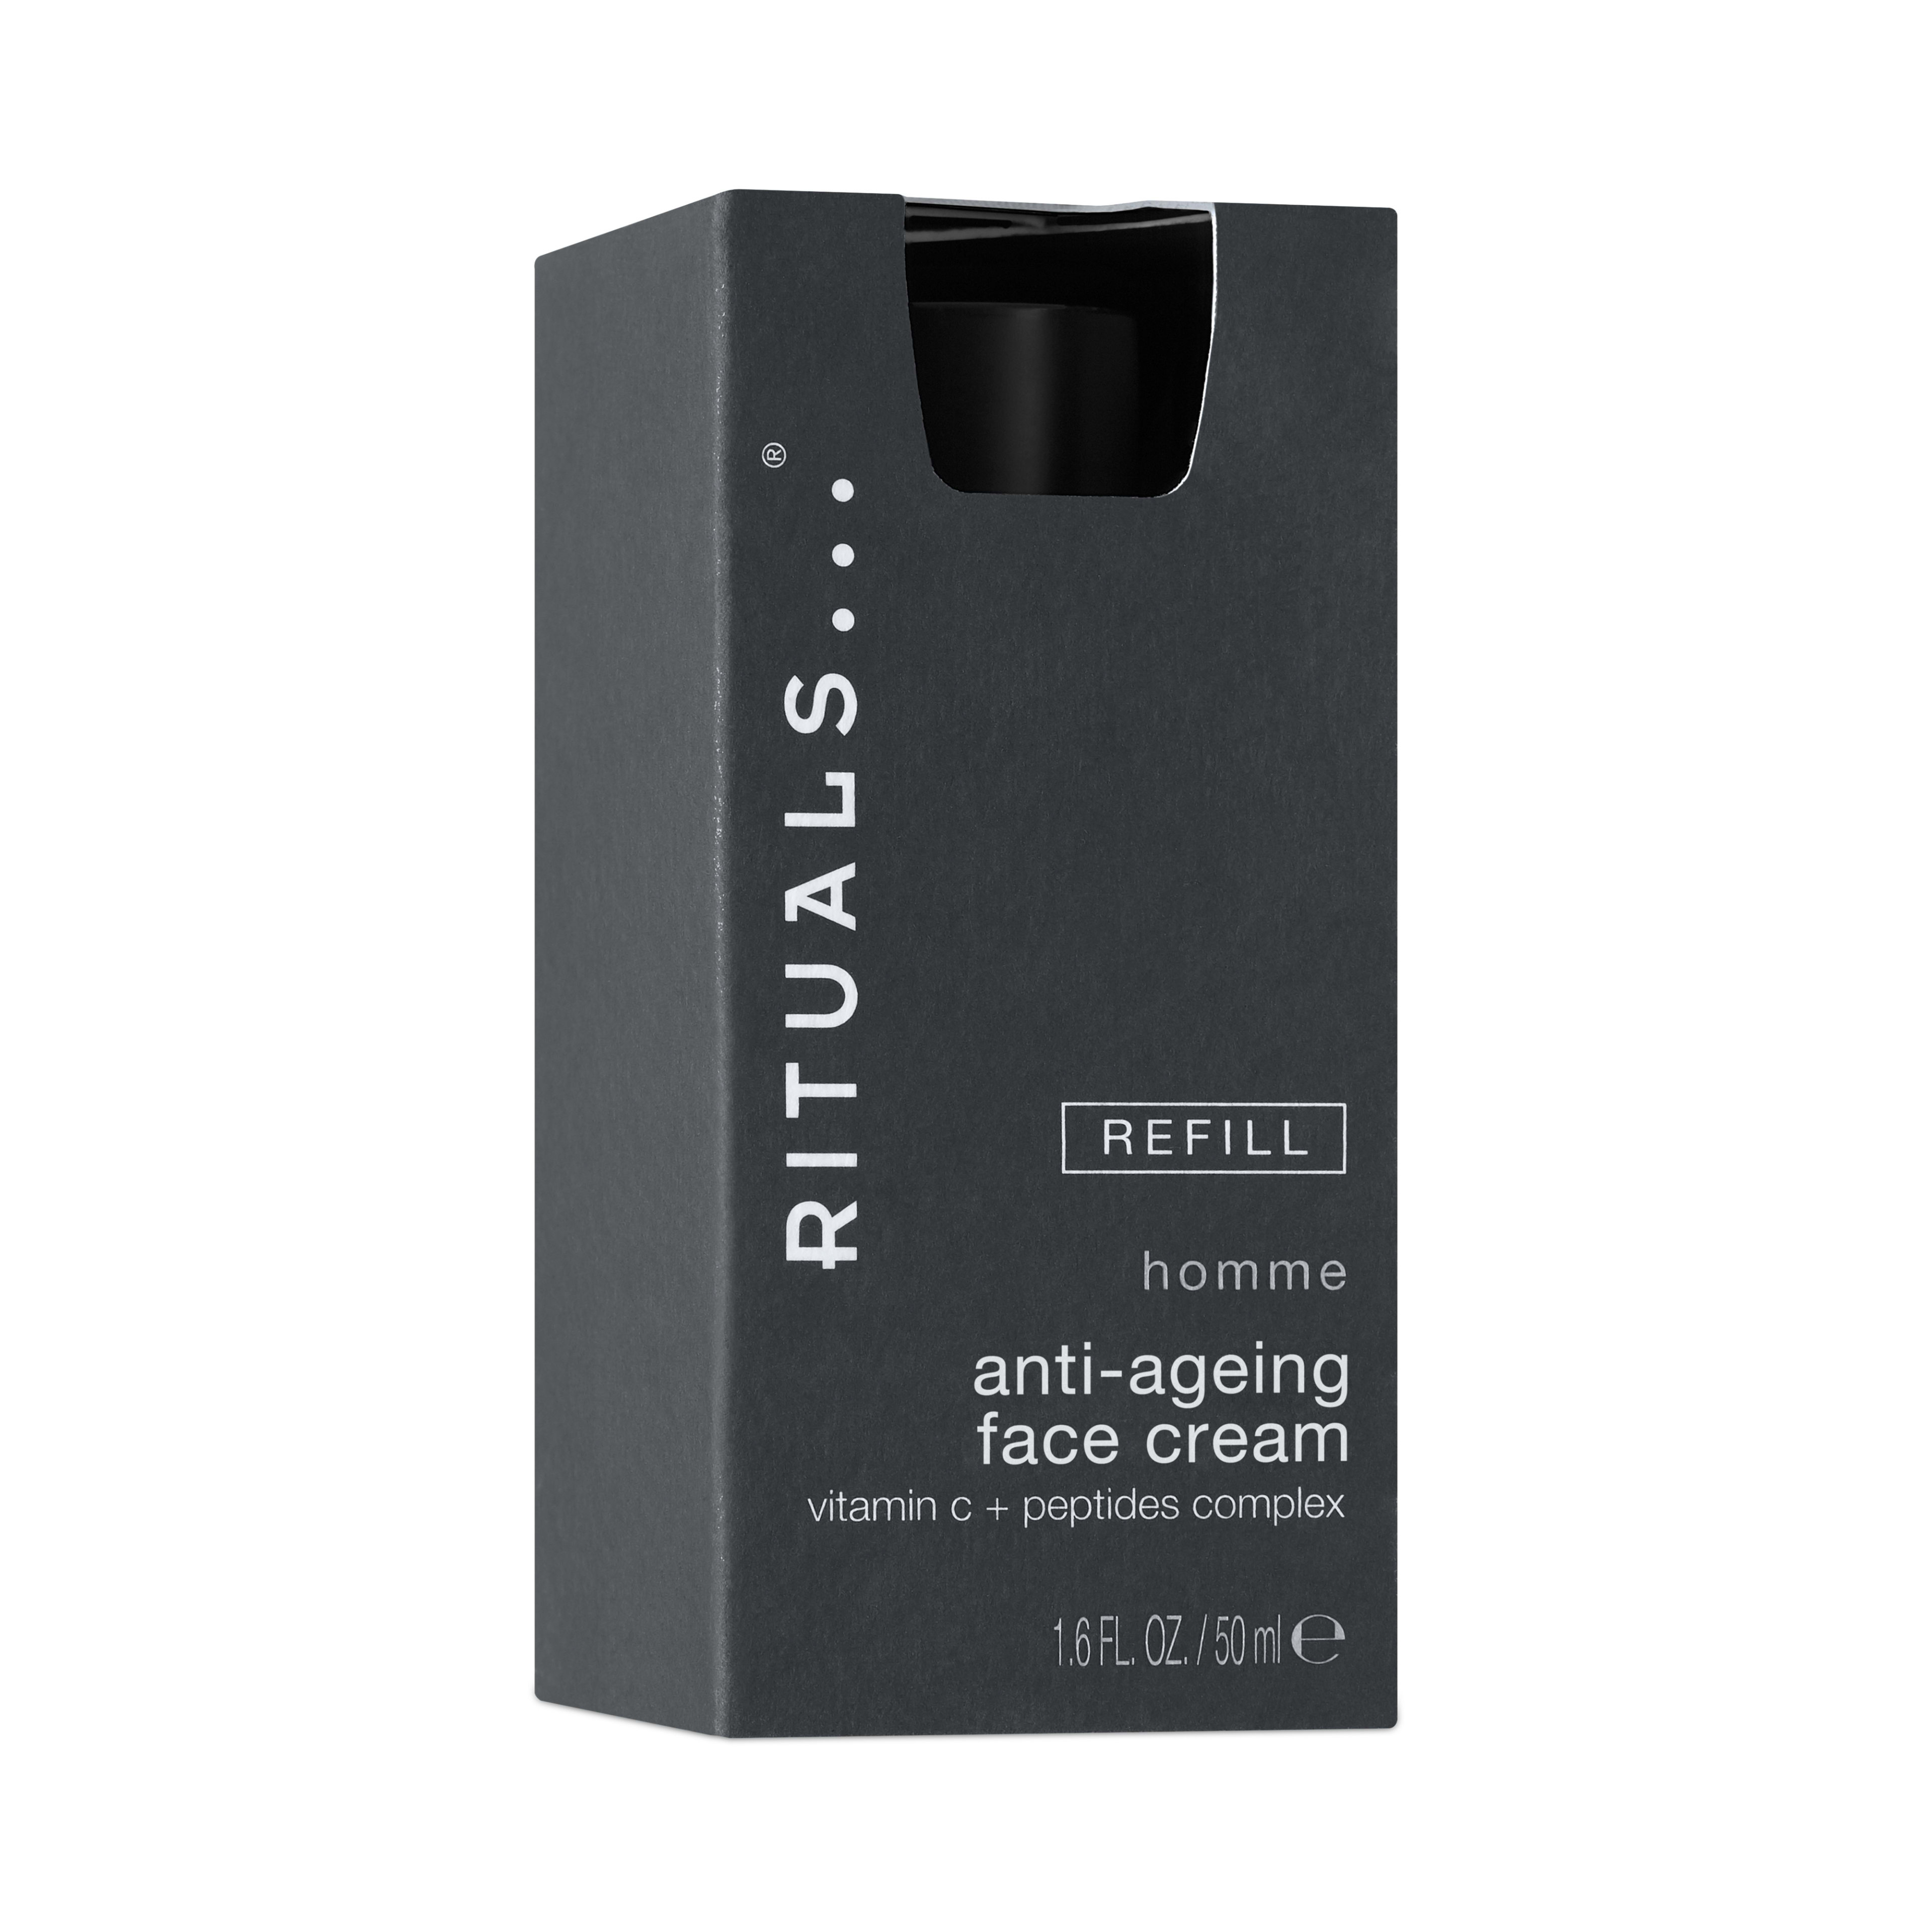 Homme Anti-Ageing face cream refill